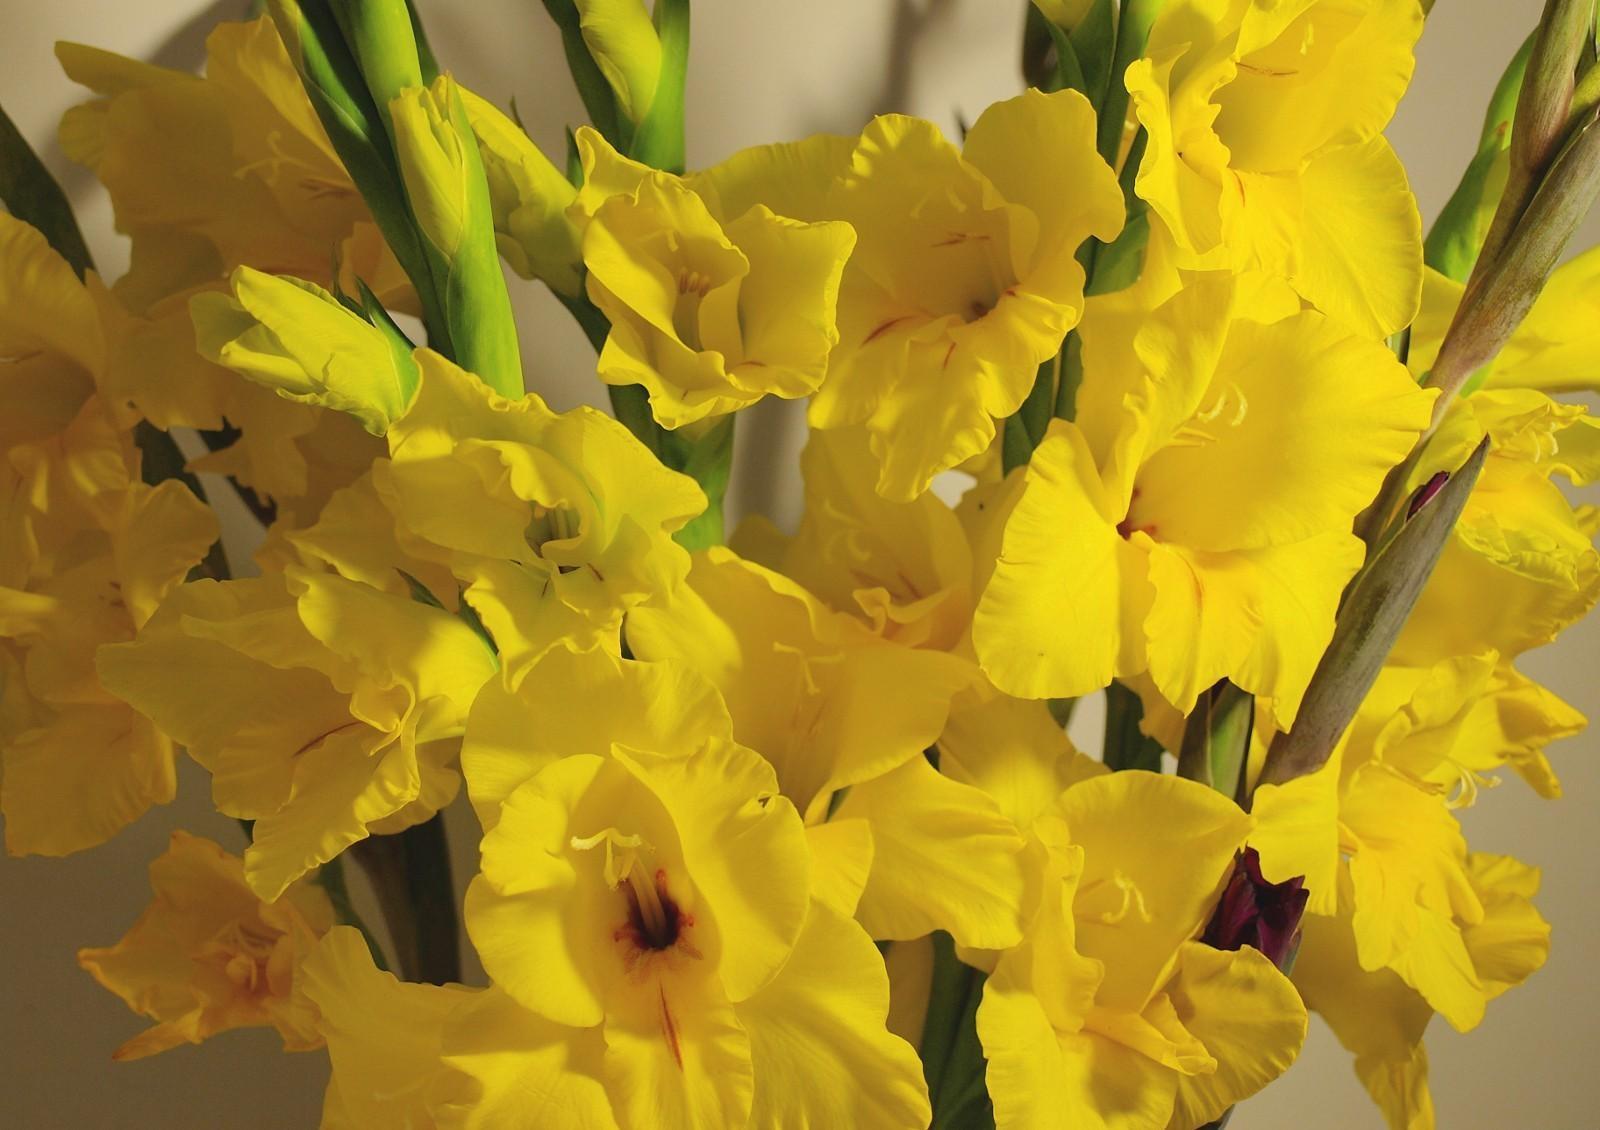 Download wallpaper 1600x1130 gladiolus, flowers, yellow, bouquet HD